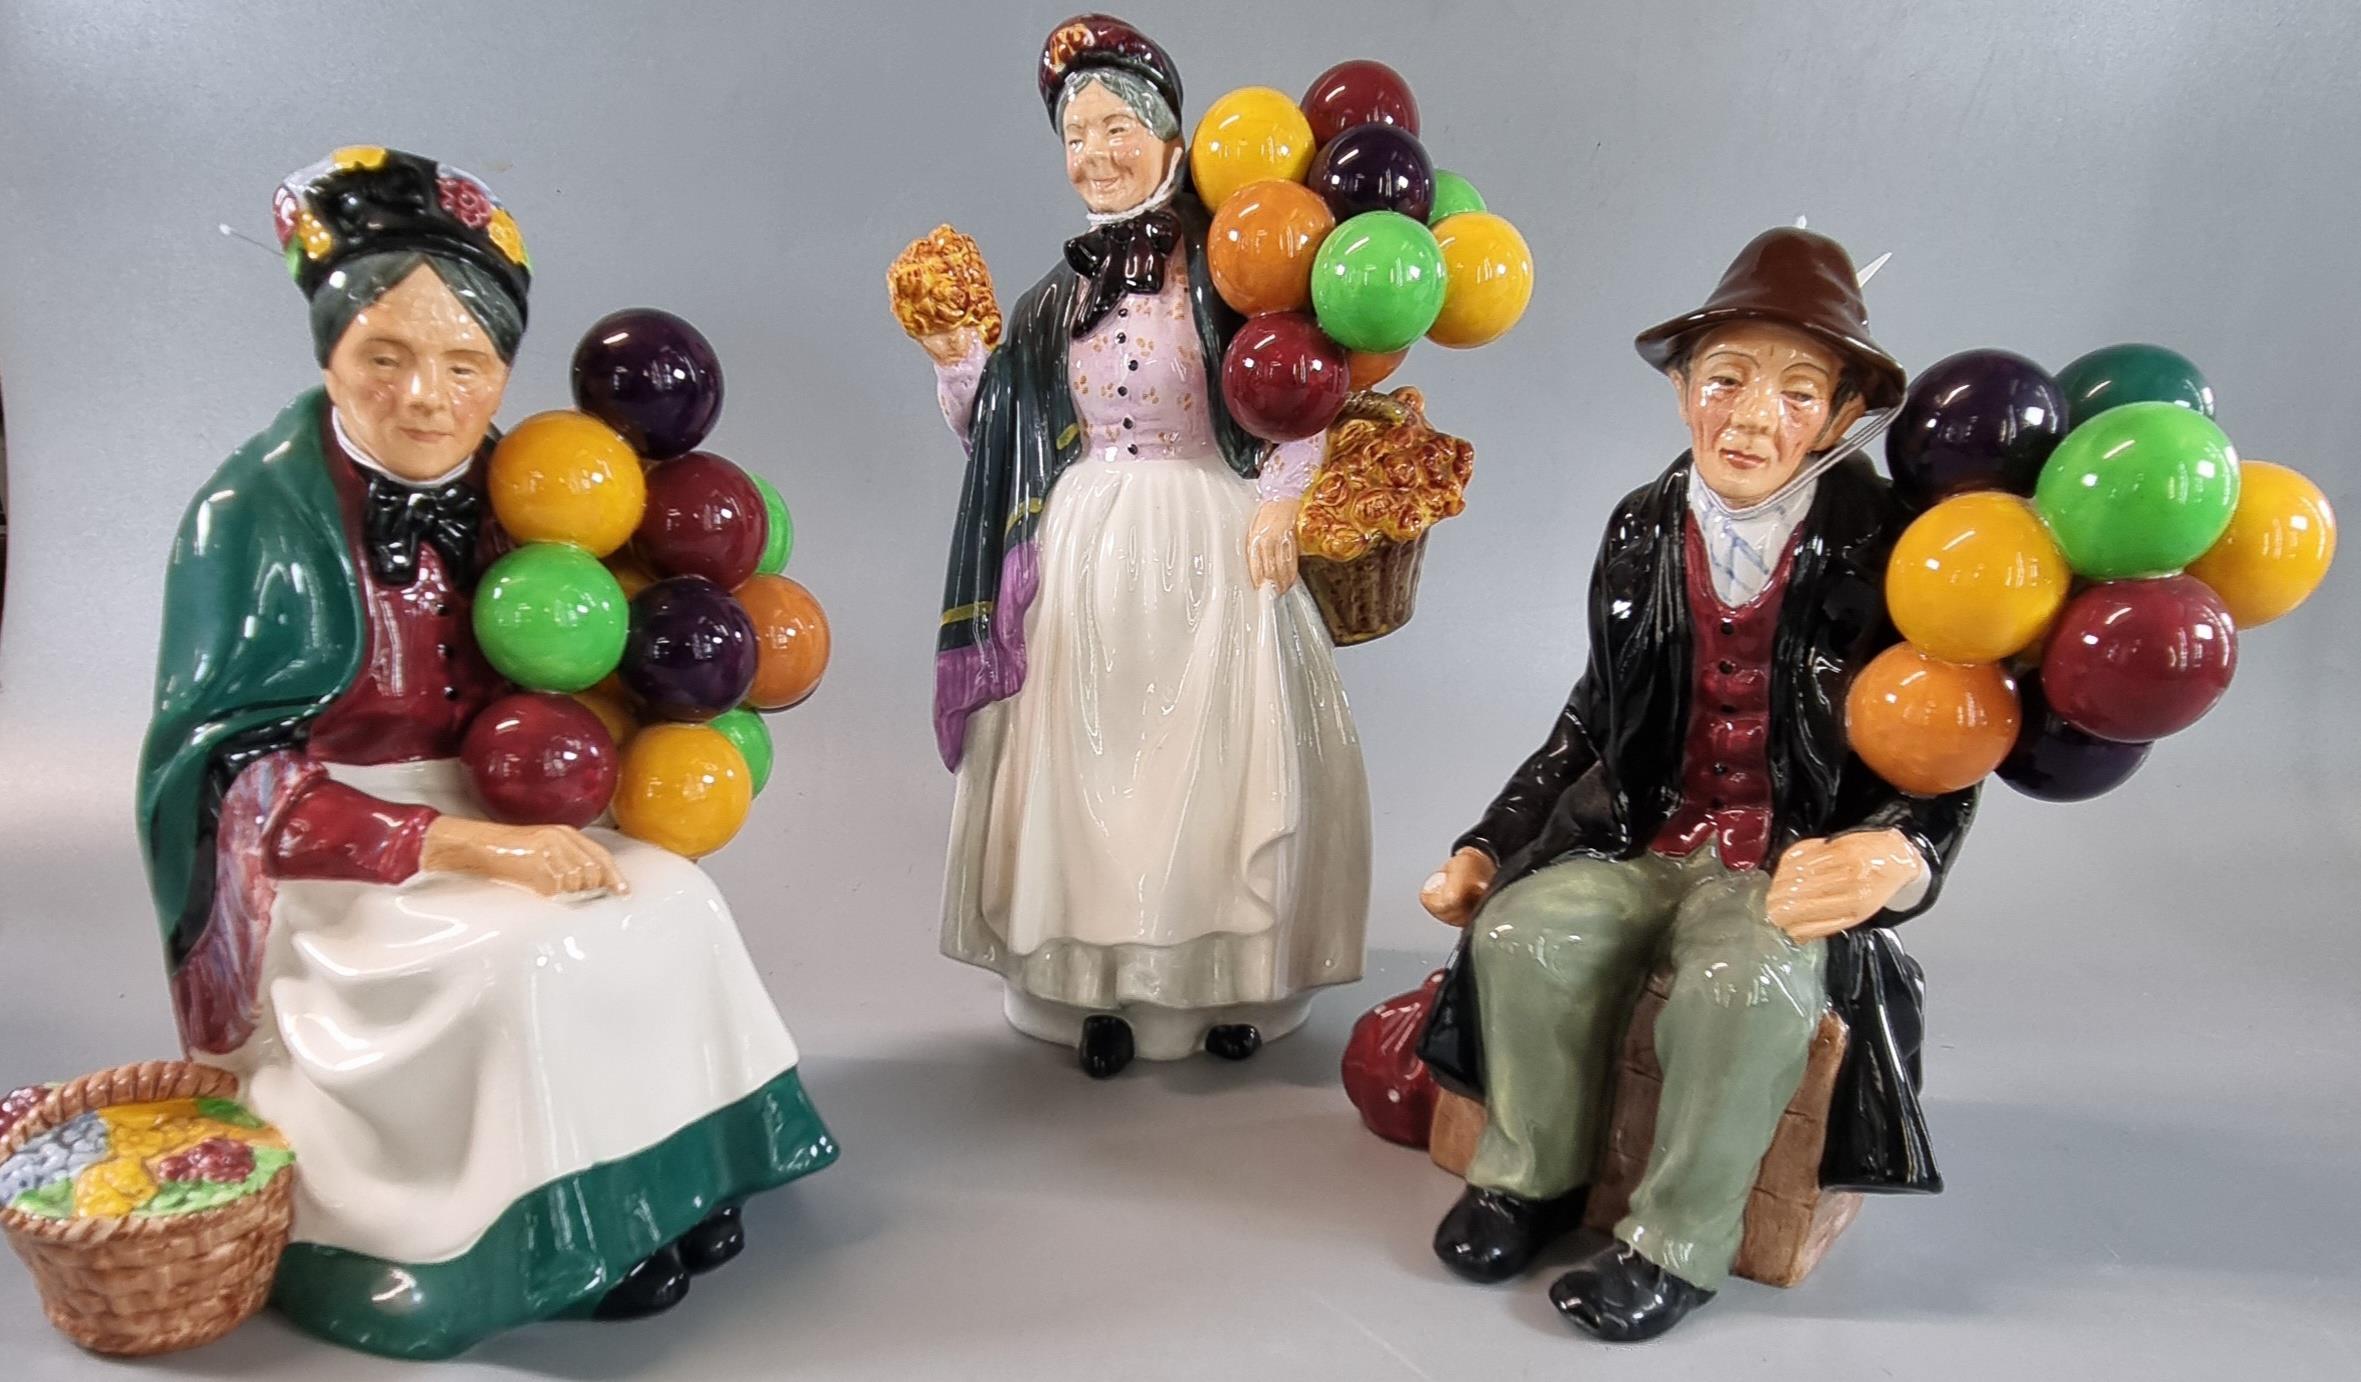 Three Royal Doulton bone china figurines to include: 'The Balloon Man', 'Biddy Pennyfarthing' and '